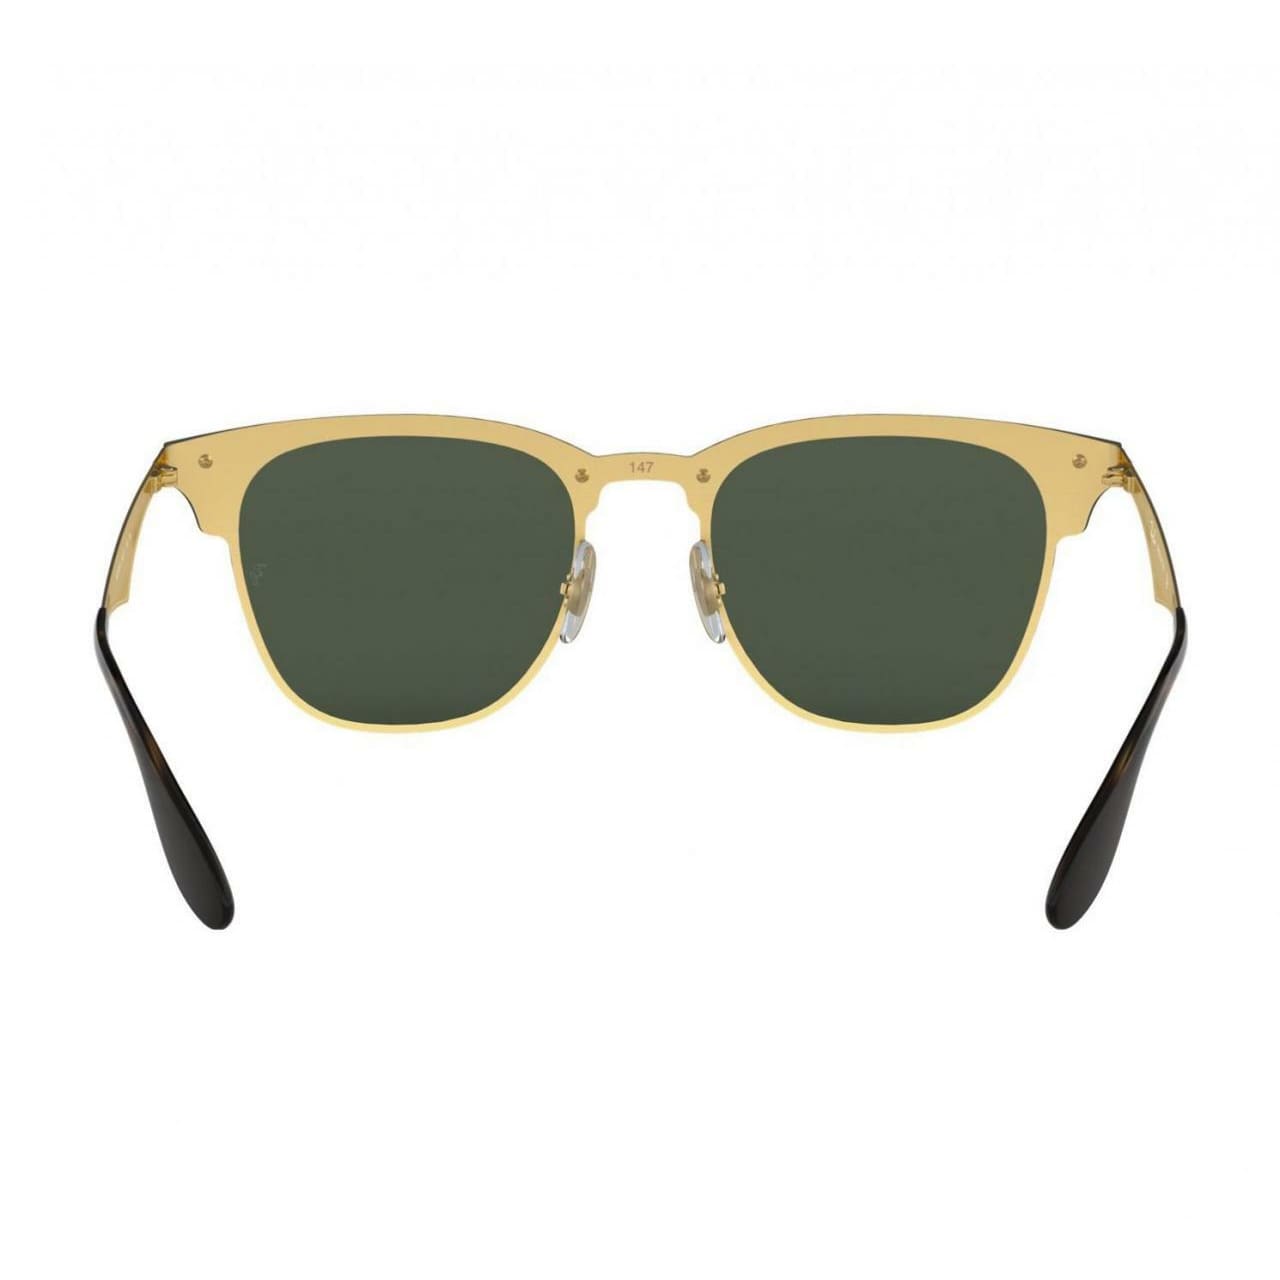 Ray-Ban RB3576N-043/71 Gold Square Green Classic Metal Sunglasses Frames 8053672763140